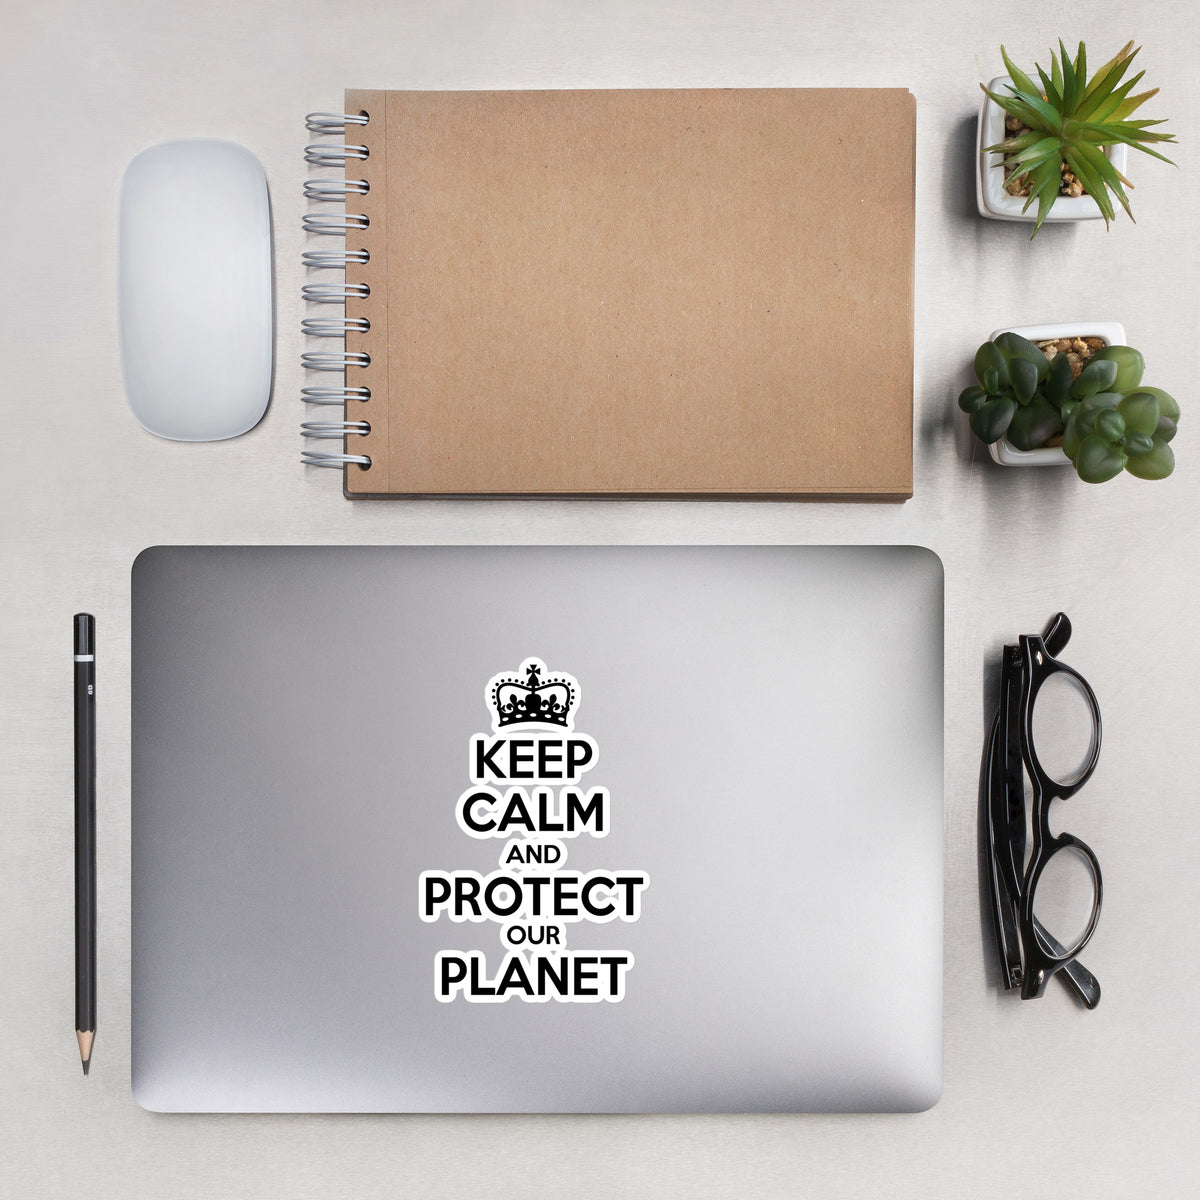 KEEP CALM PROTECT OUR PLANET Sticker